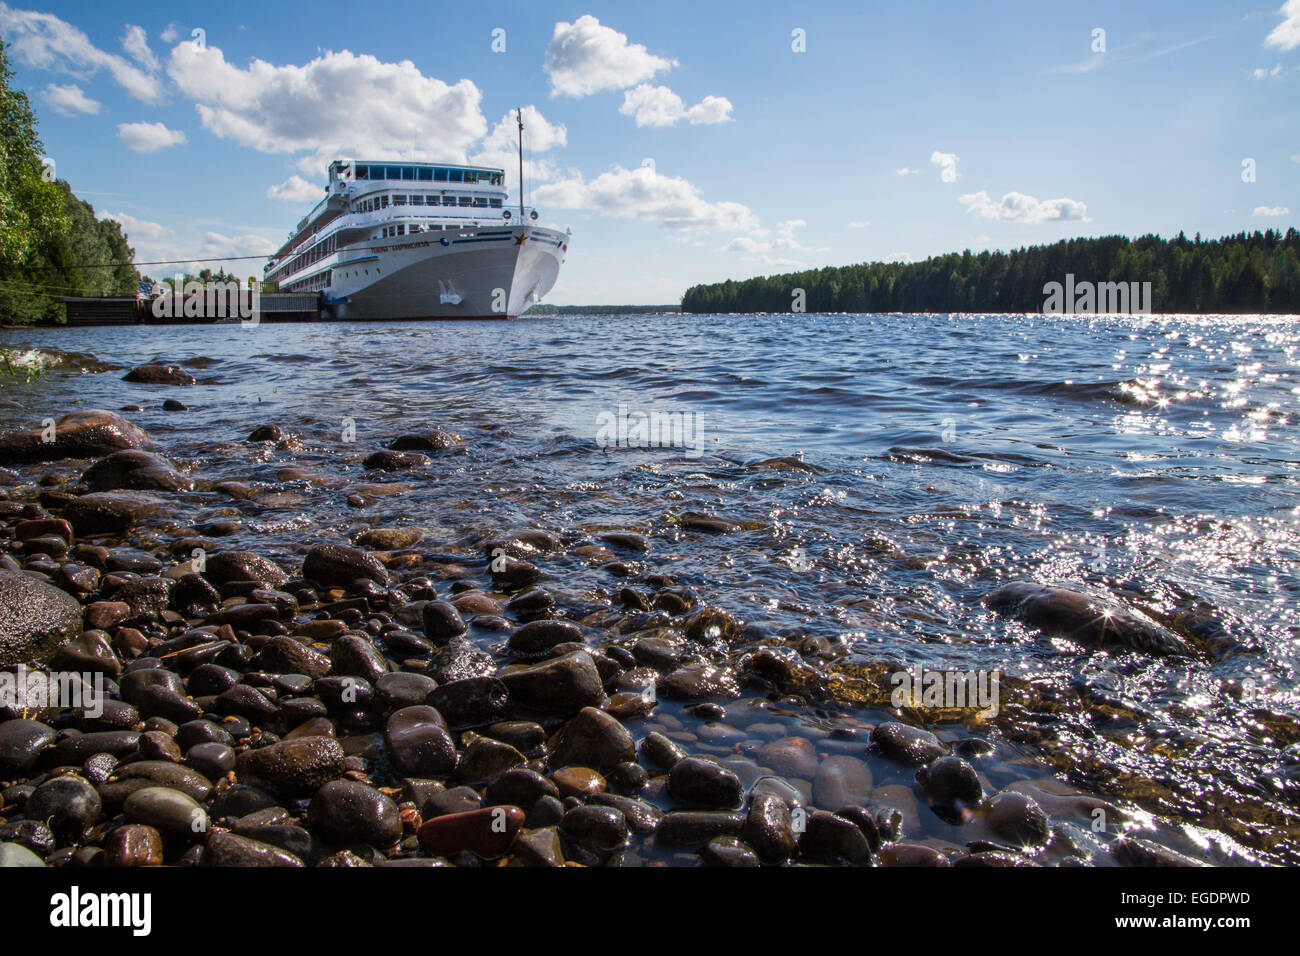 River cruise ship MS General Lavrinenkov (Orthodox Cruise Company) at the pier of the Mandrogi crafts village, Mandroga, Svir river, Russia, Europe Stock Photo